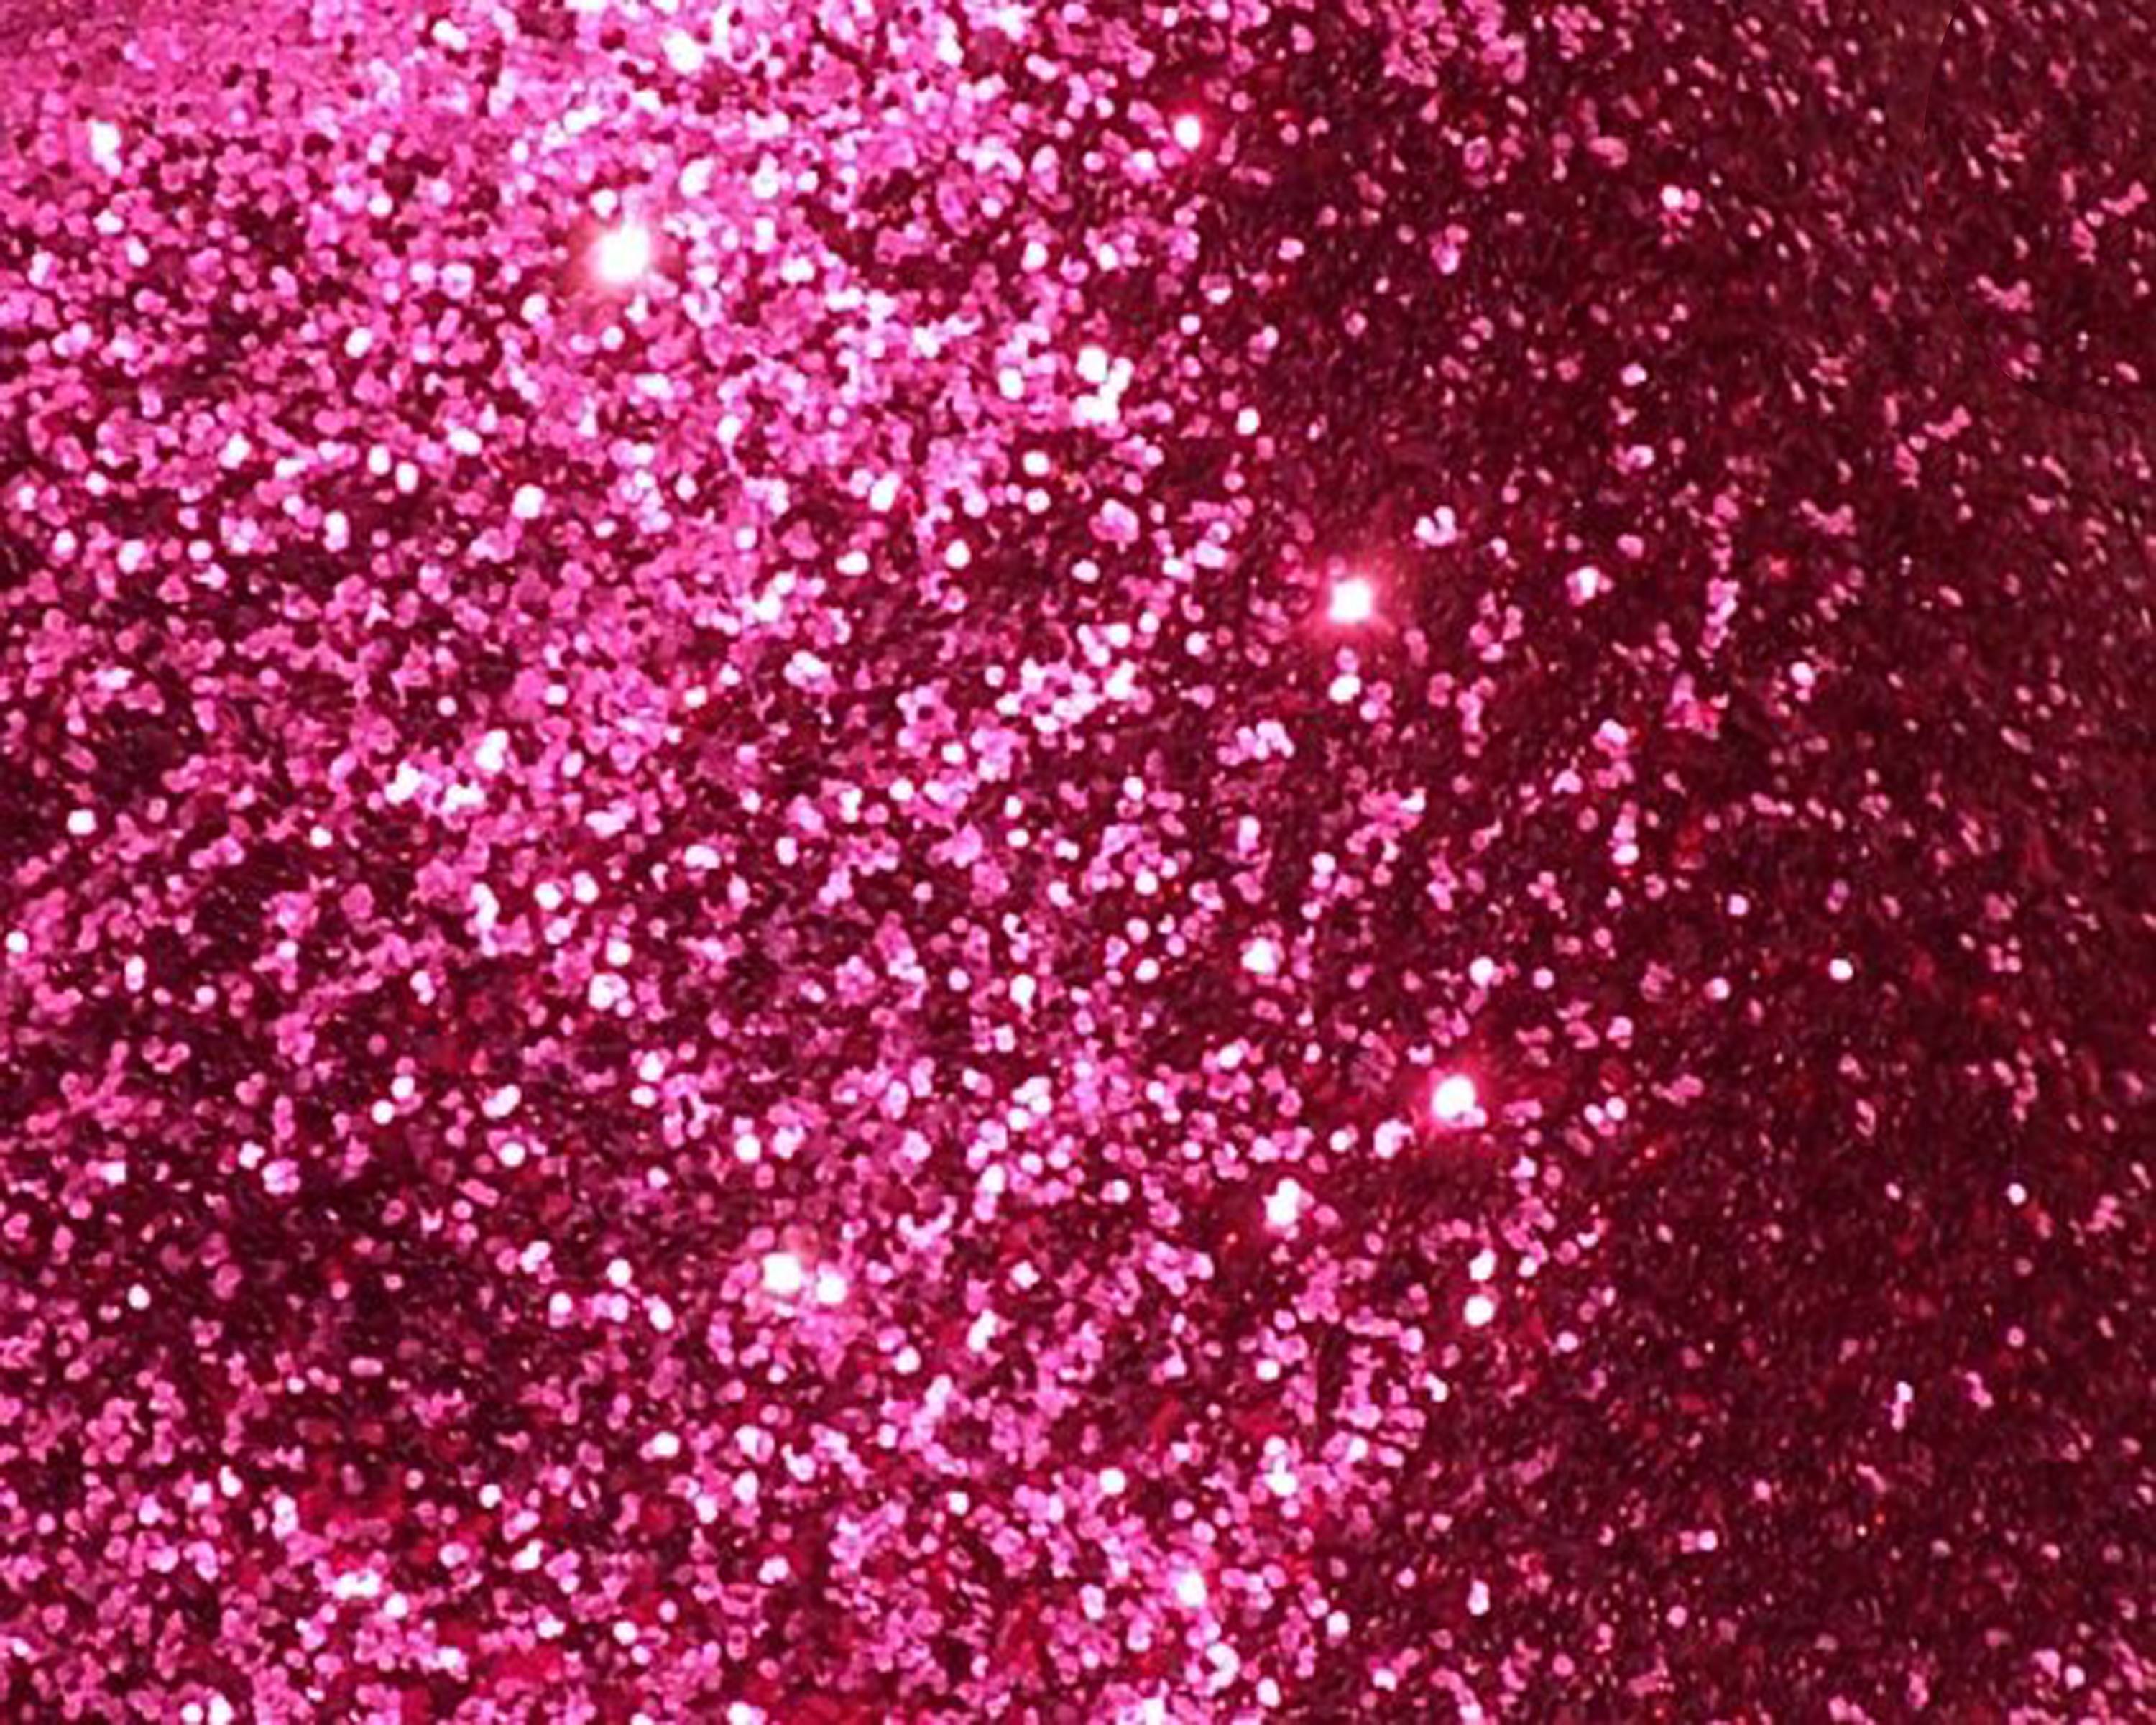 Glitter Wallpapers Free - Wallpaper Cave